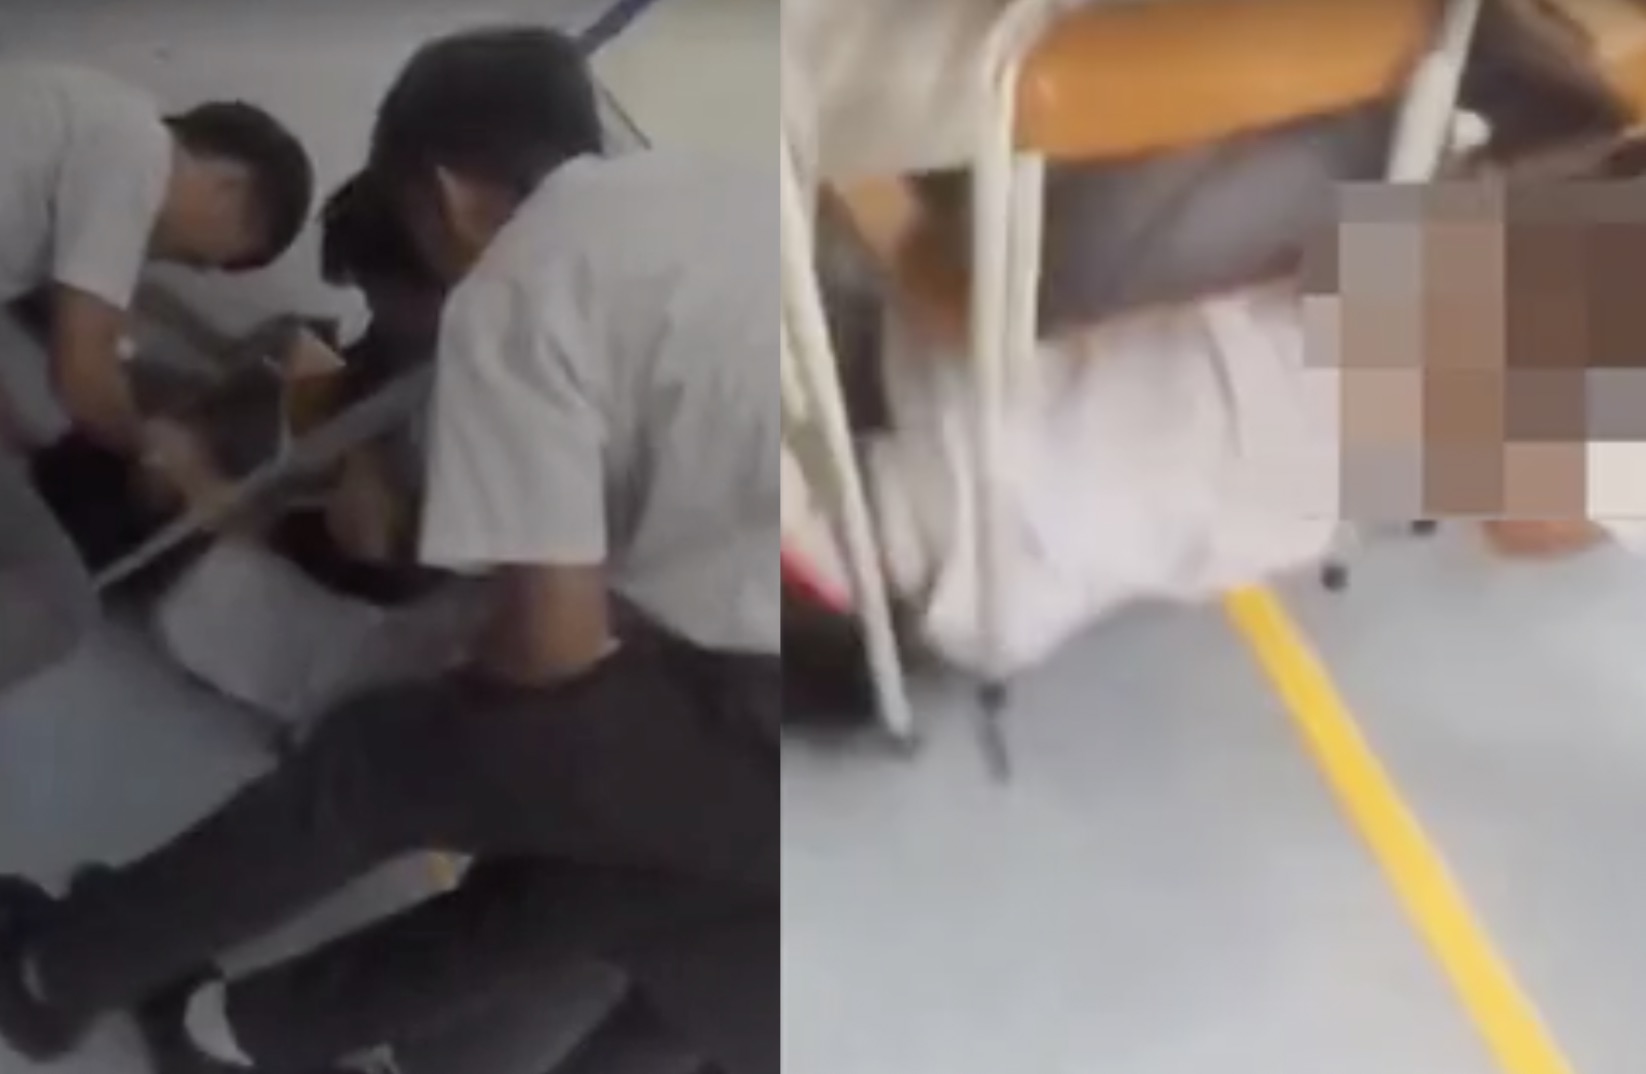 Eight teenage boys have been arrested after a video of them harassing another boy by pinning him down and pulling down his pants went viral. Screengrabs via Apple Daily video.